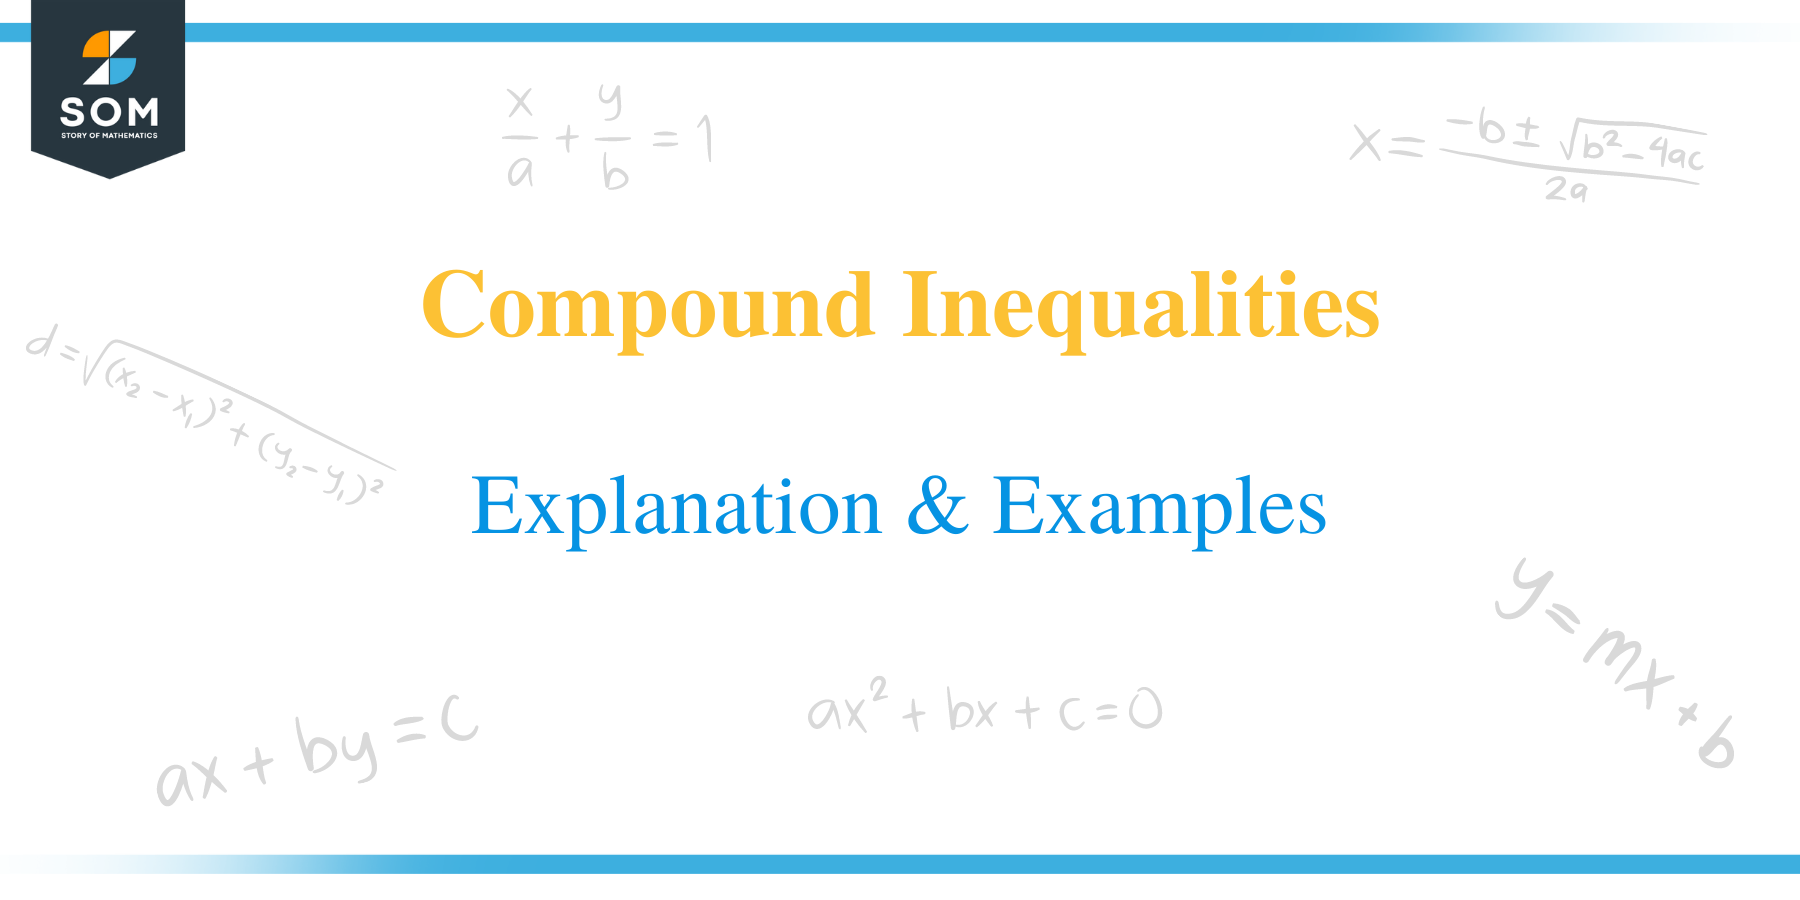 Compound Inequalities title